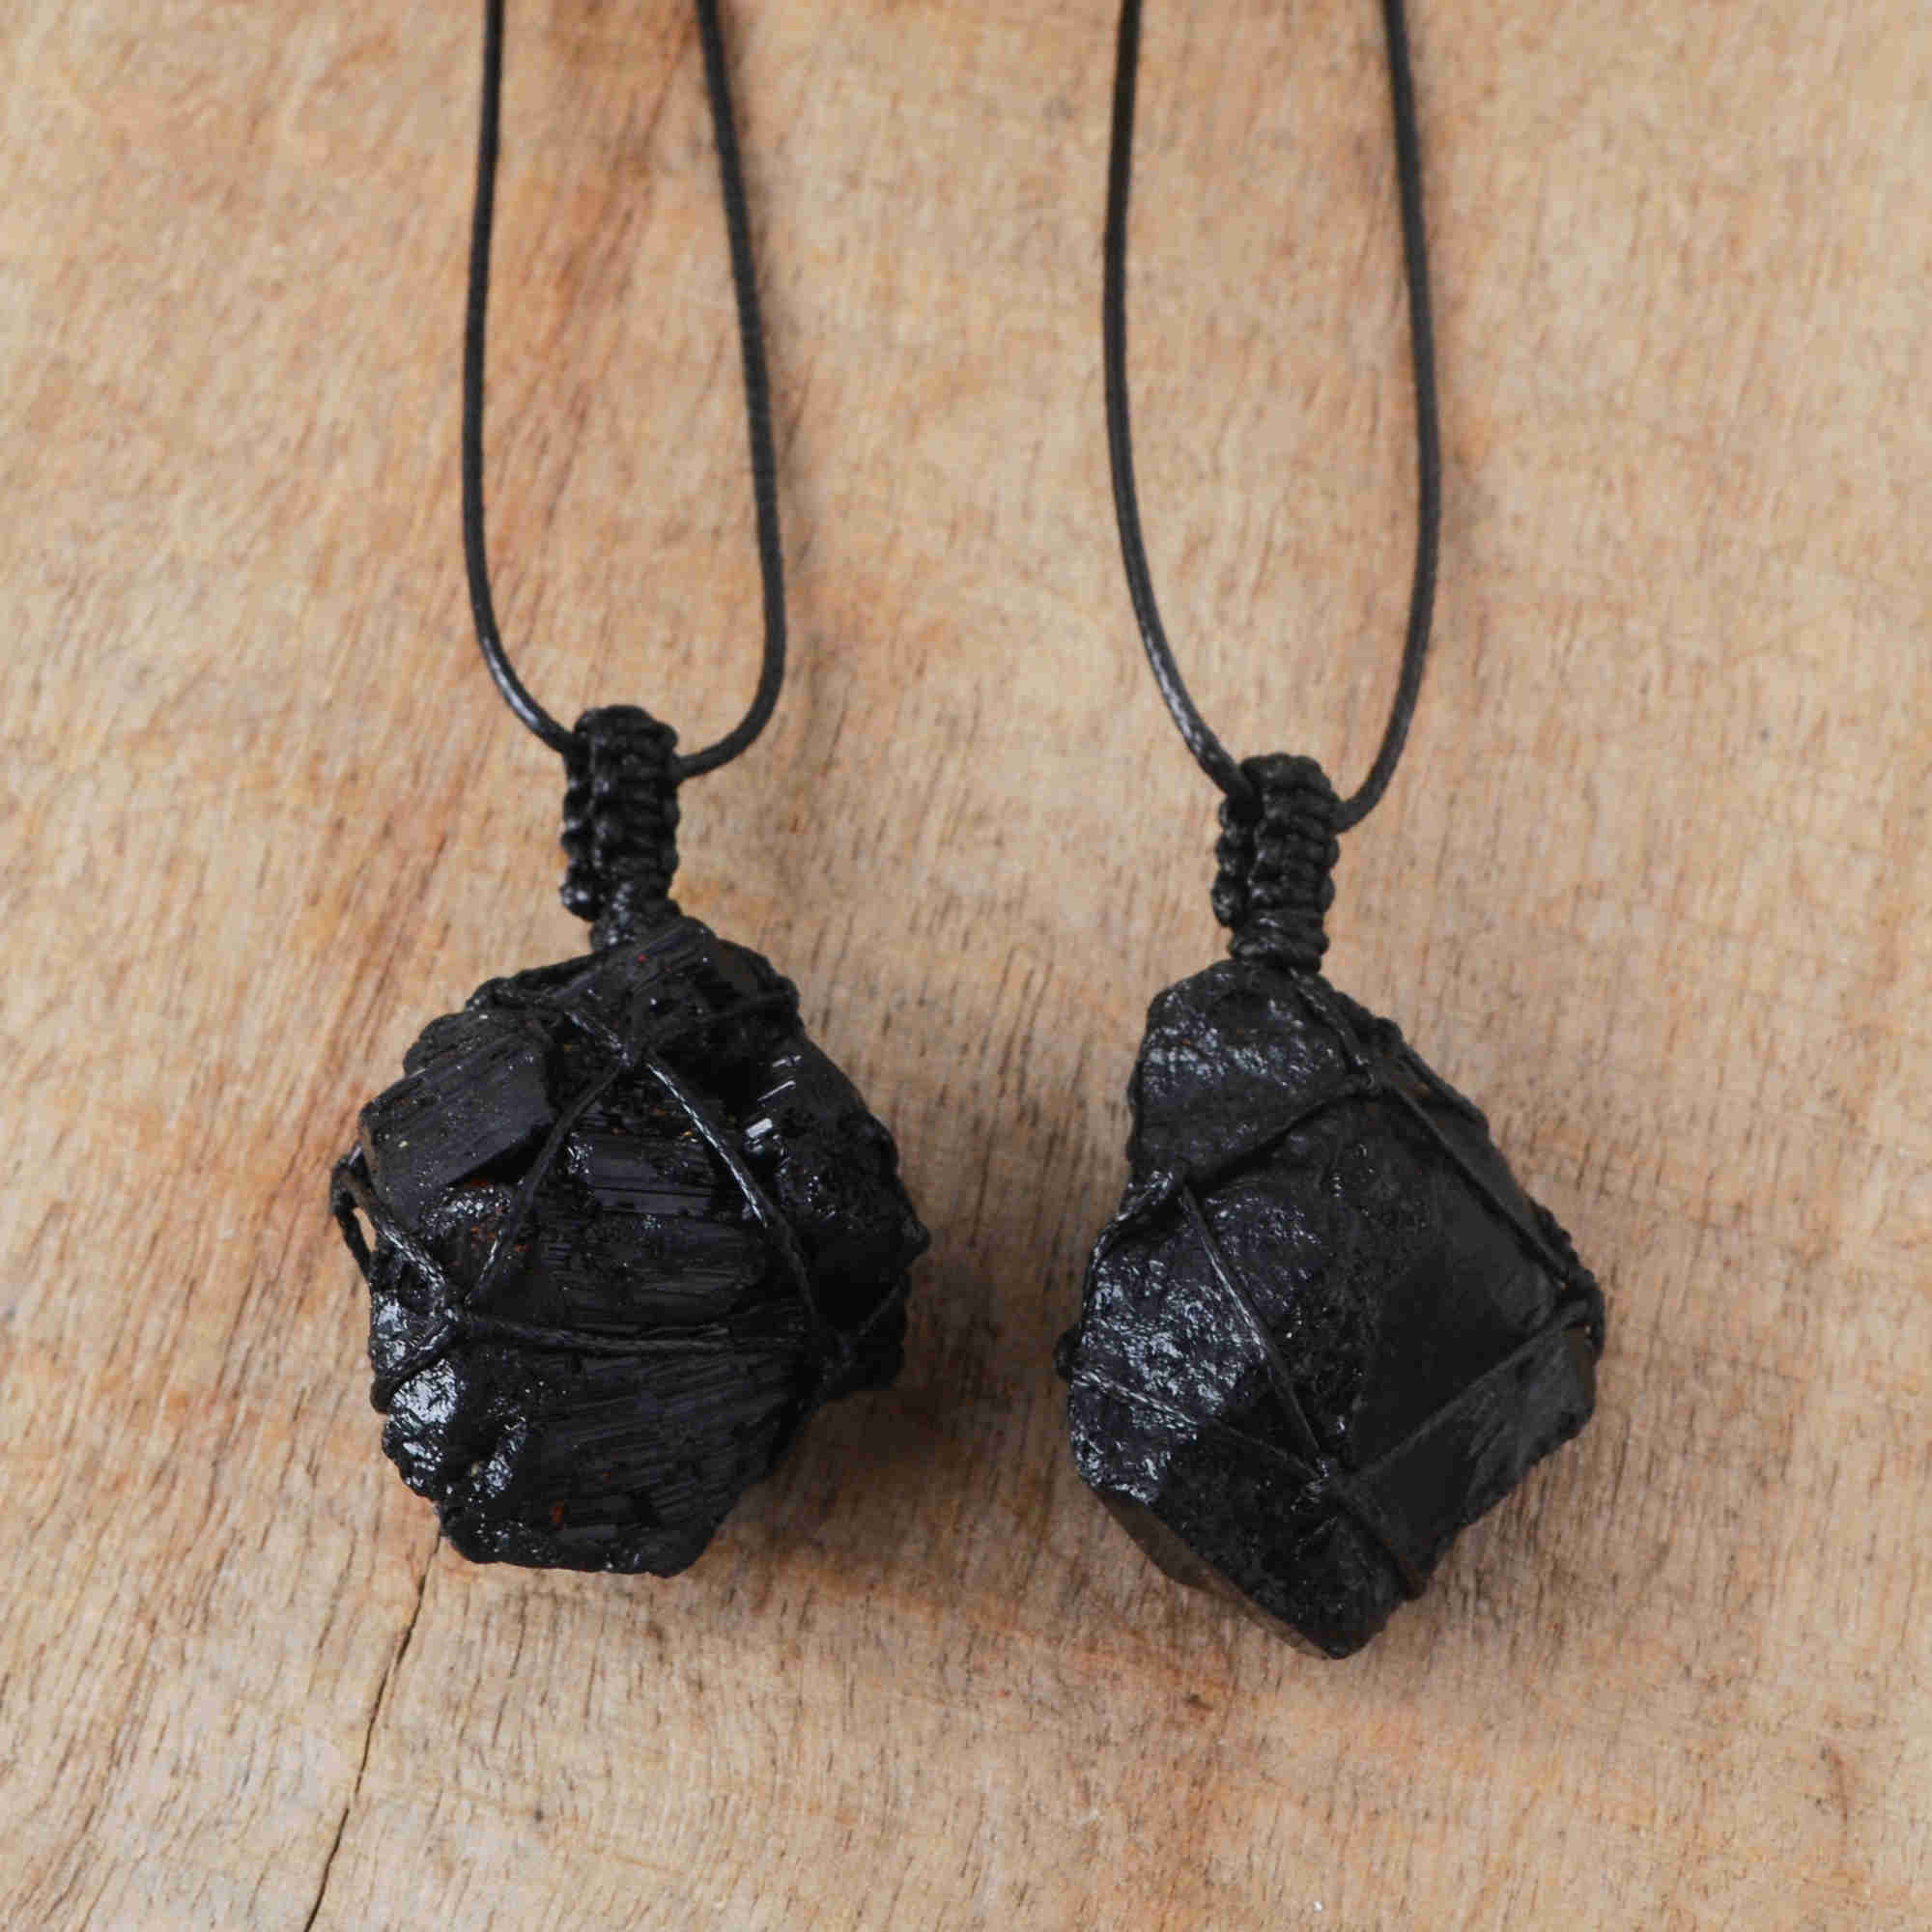 black obsidian necklace, wrap necklace, handmade necklace, healing crystal stone necklace, gemstone jewelry, wholesale supply